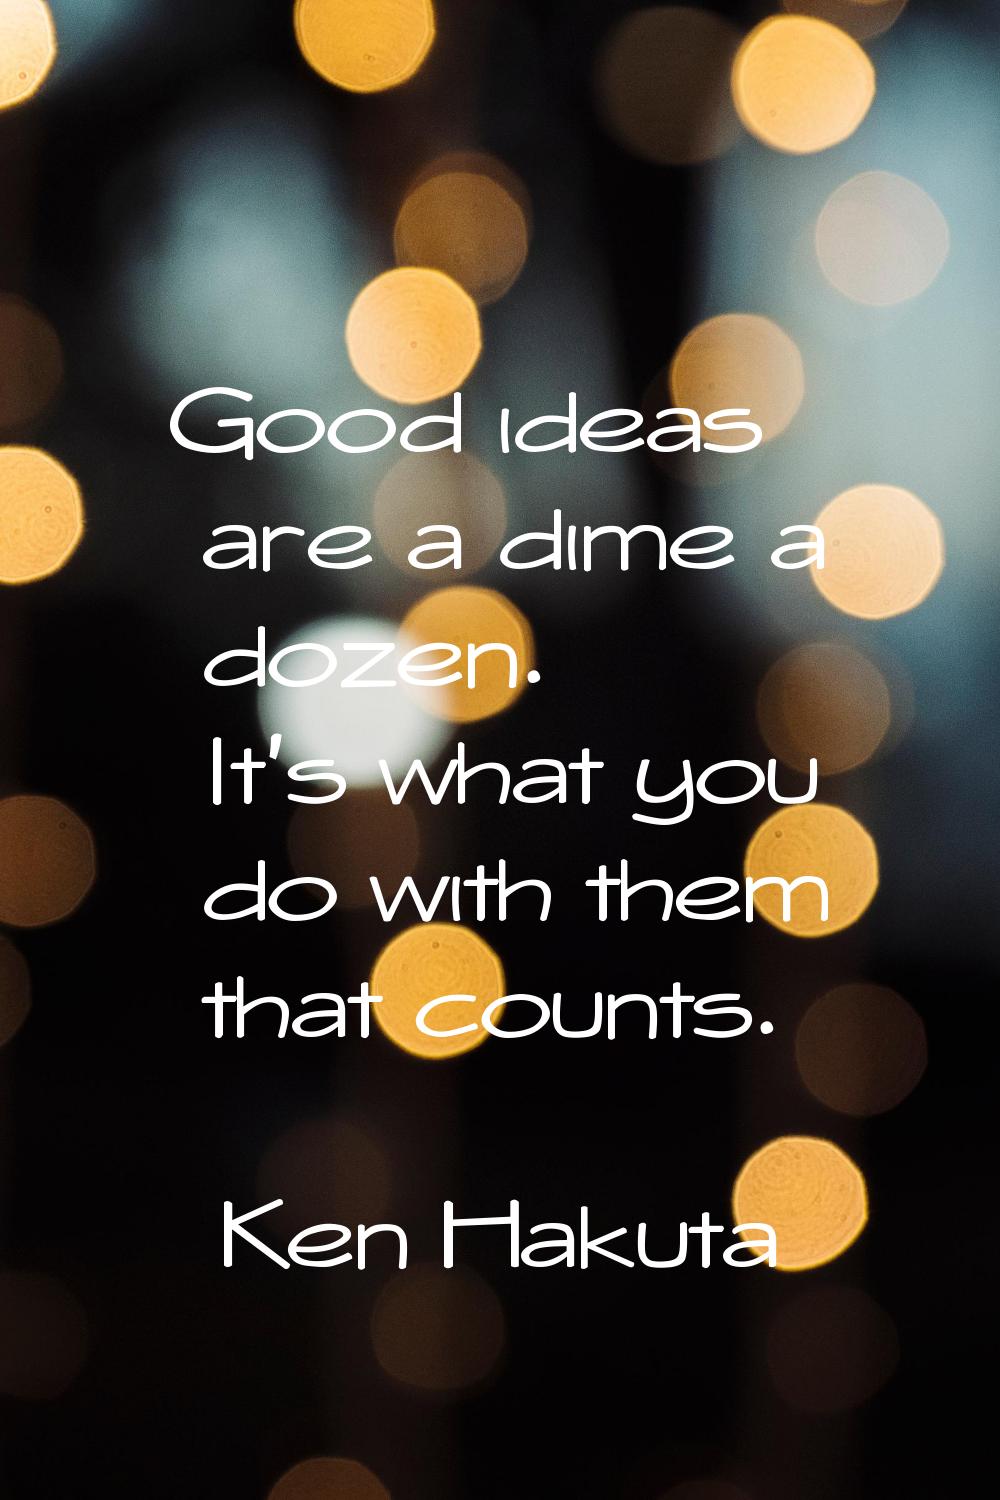 Good ideas are a dime a dozen. It's what you do with them that counts.